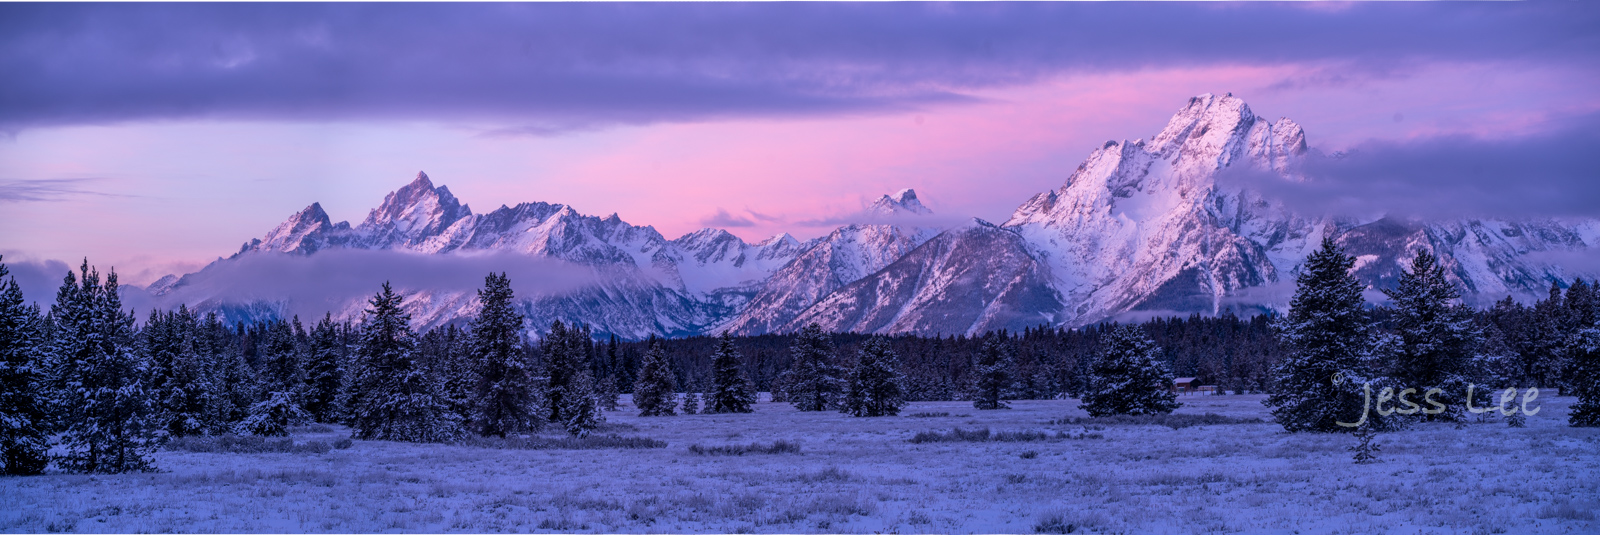 Fine Art Photography of Winter in the Tetons